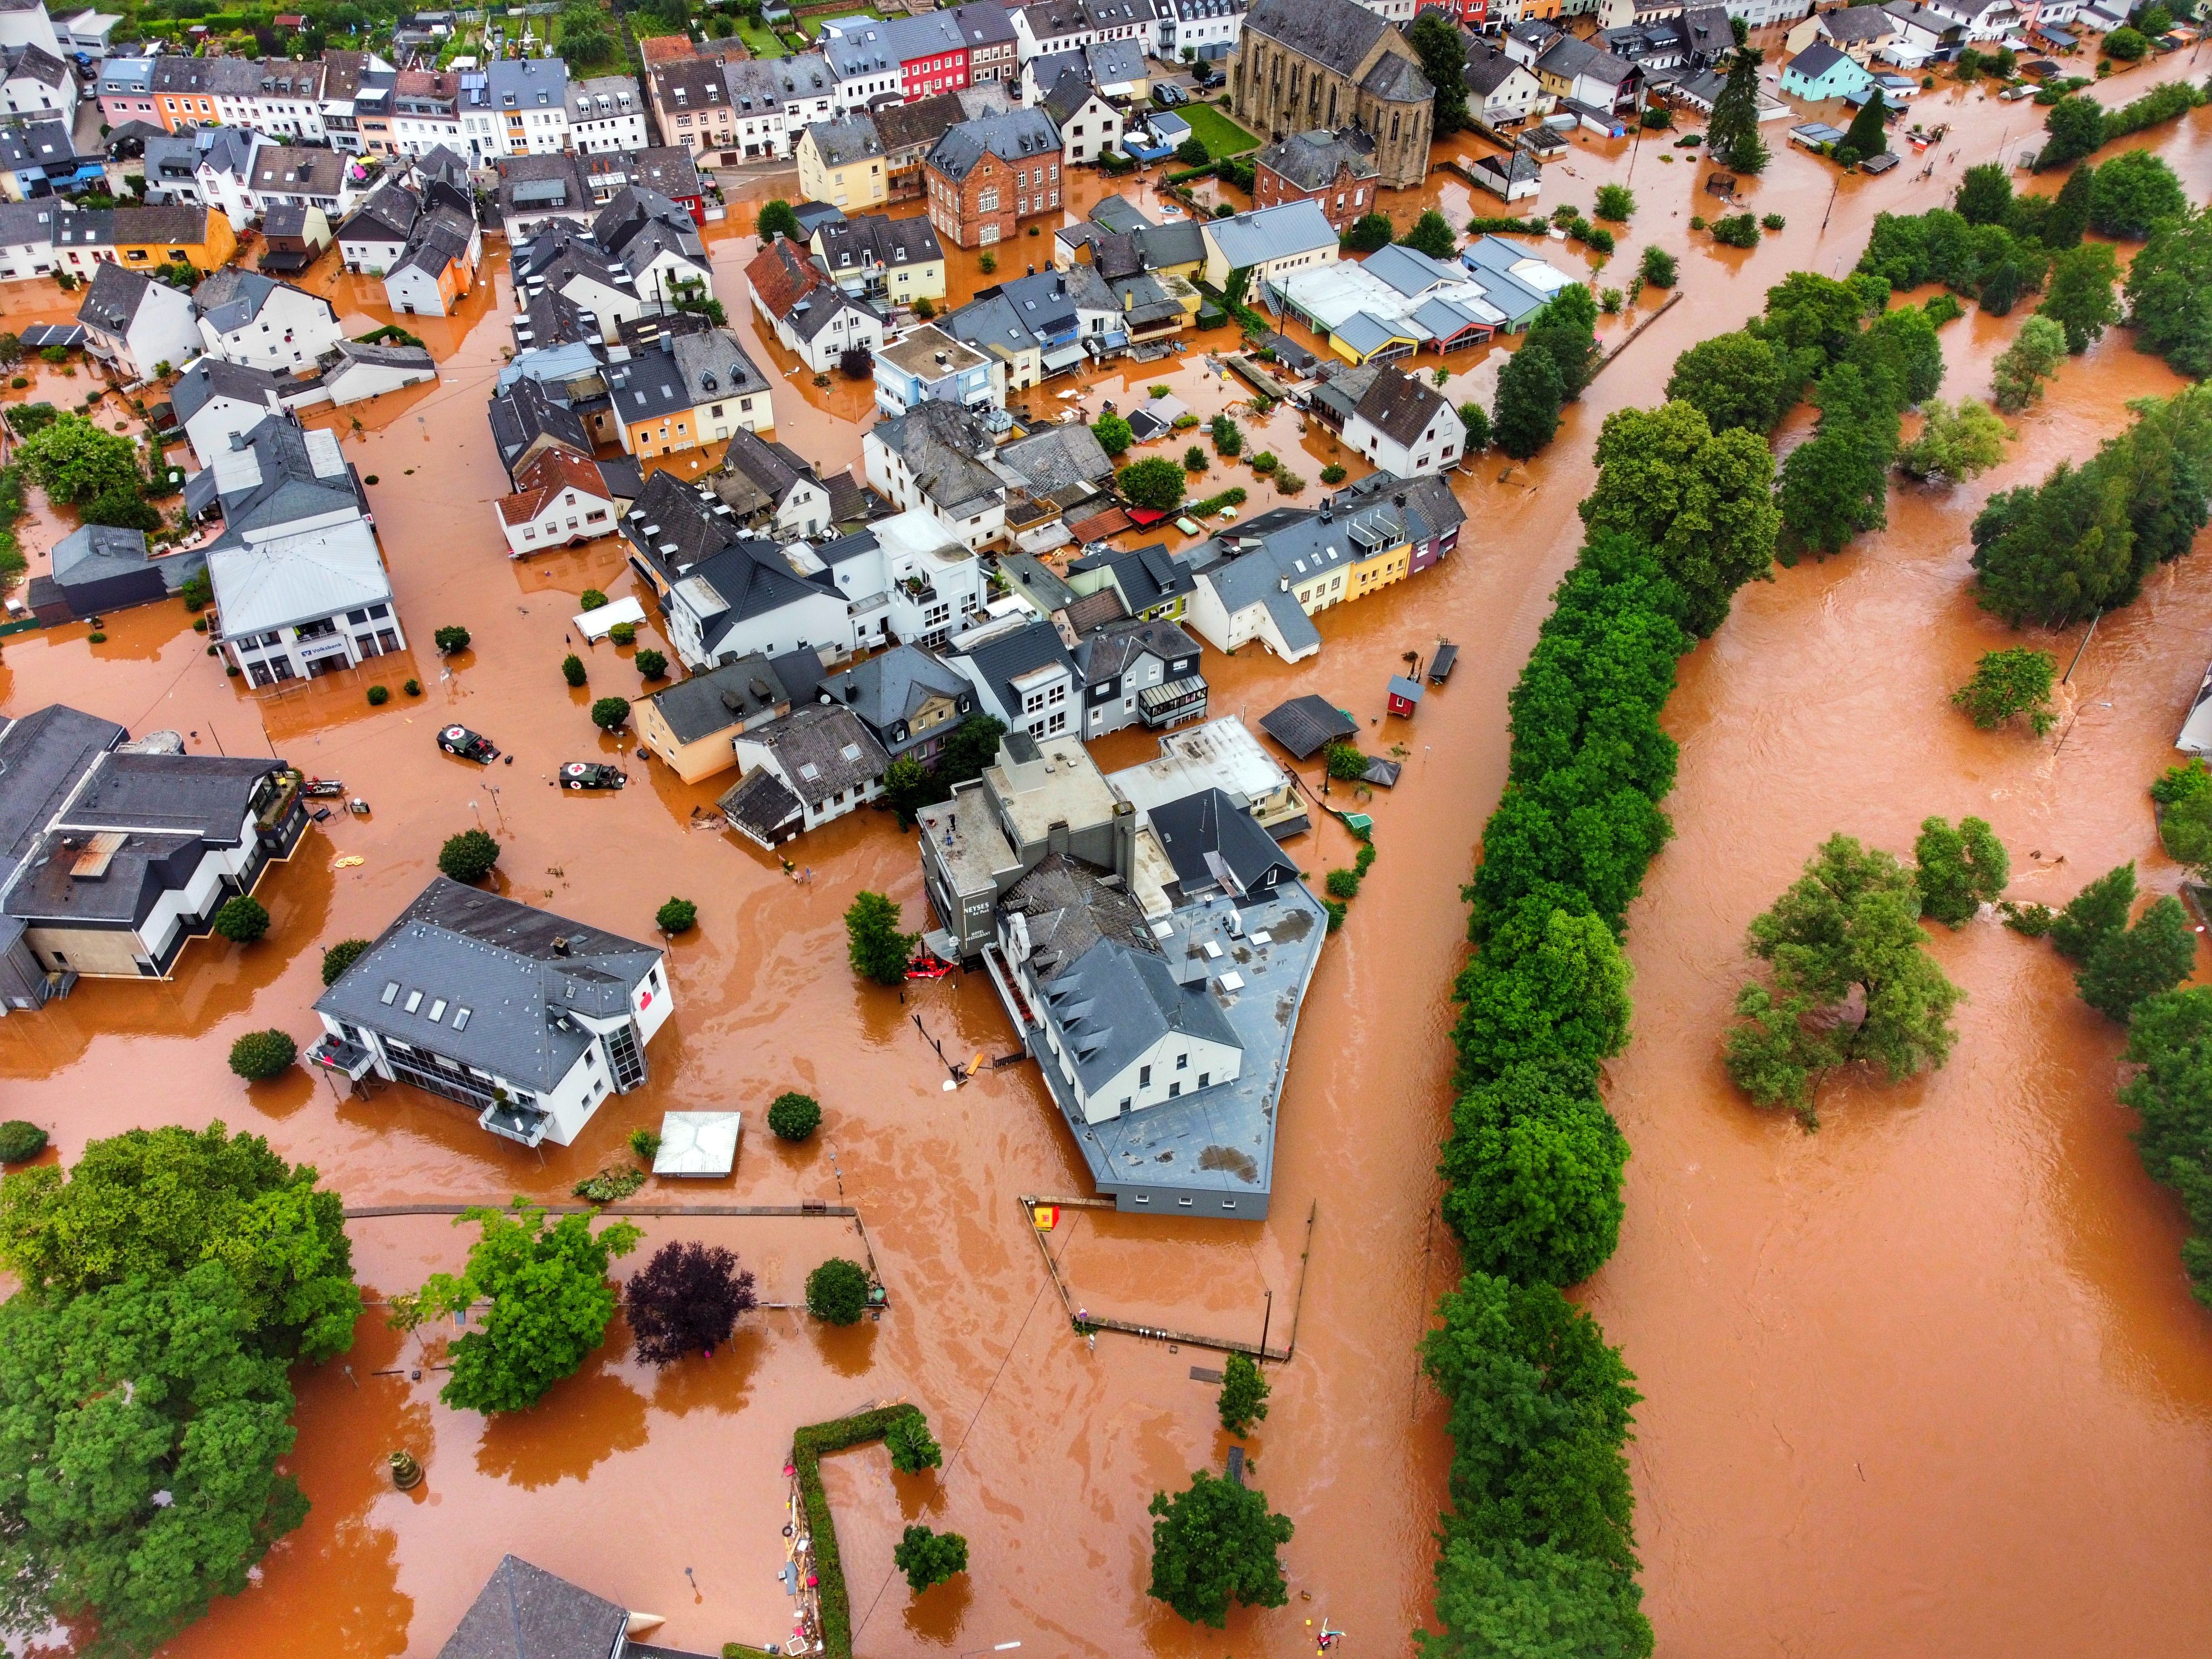 An image showing the town of Rhineland-Palatinate, Kordel flooded.